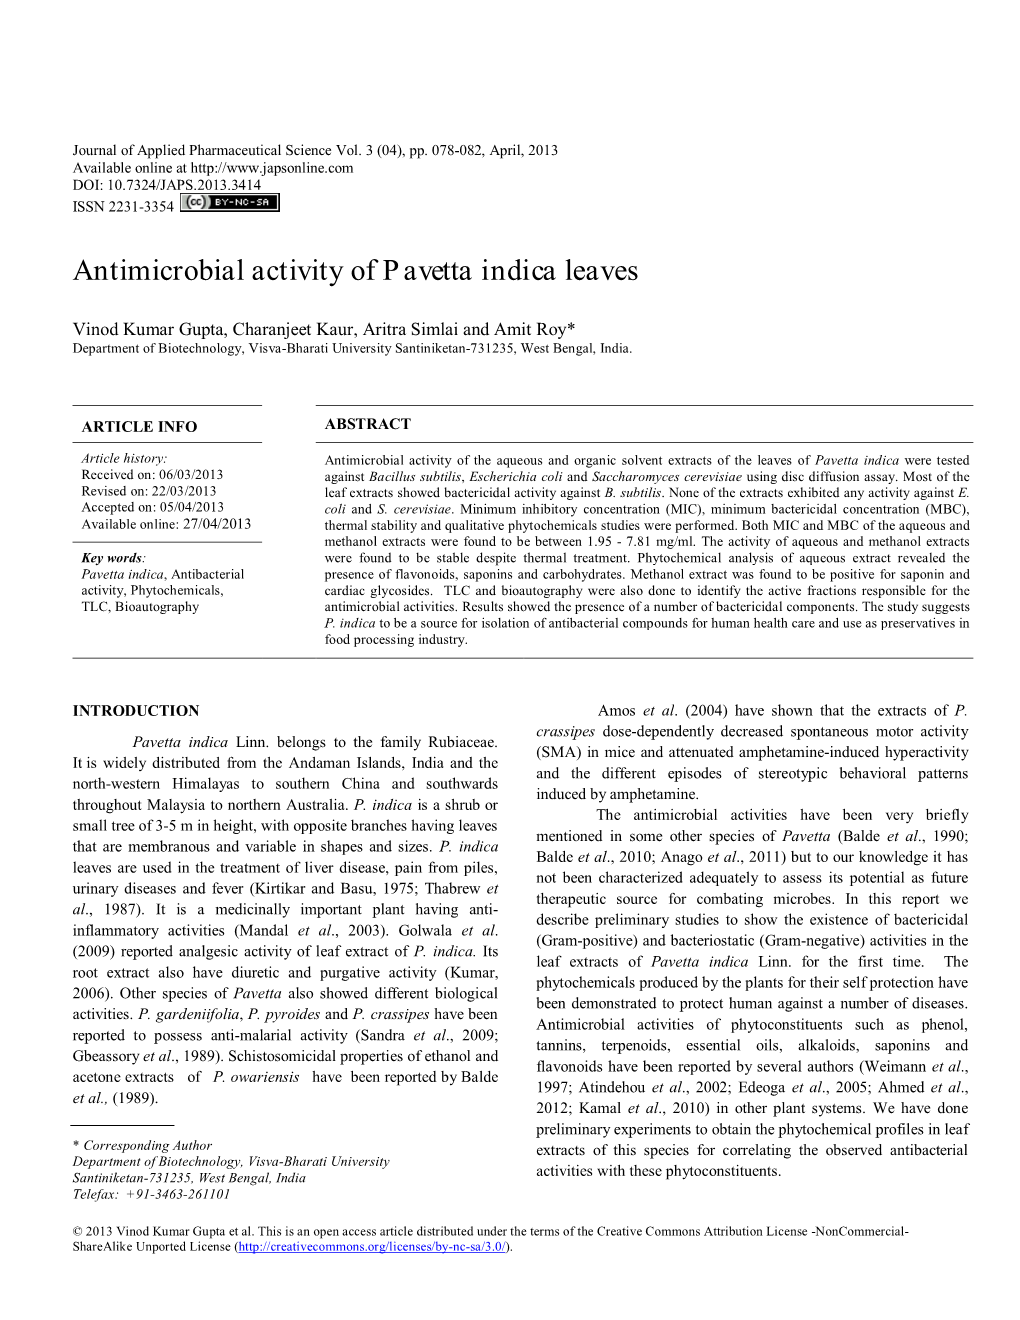 Antimicrobial Activity of Pavetta Indica Leaves